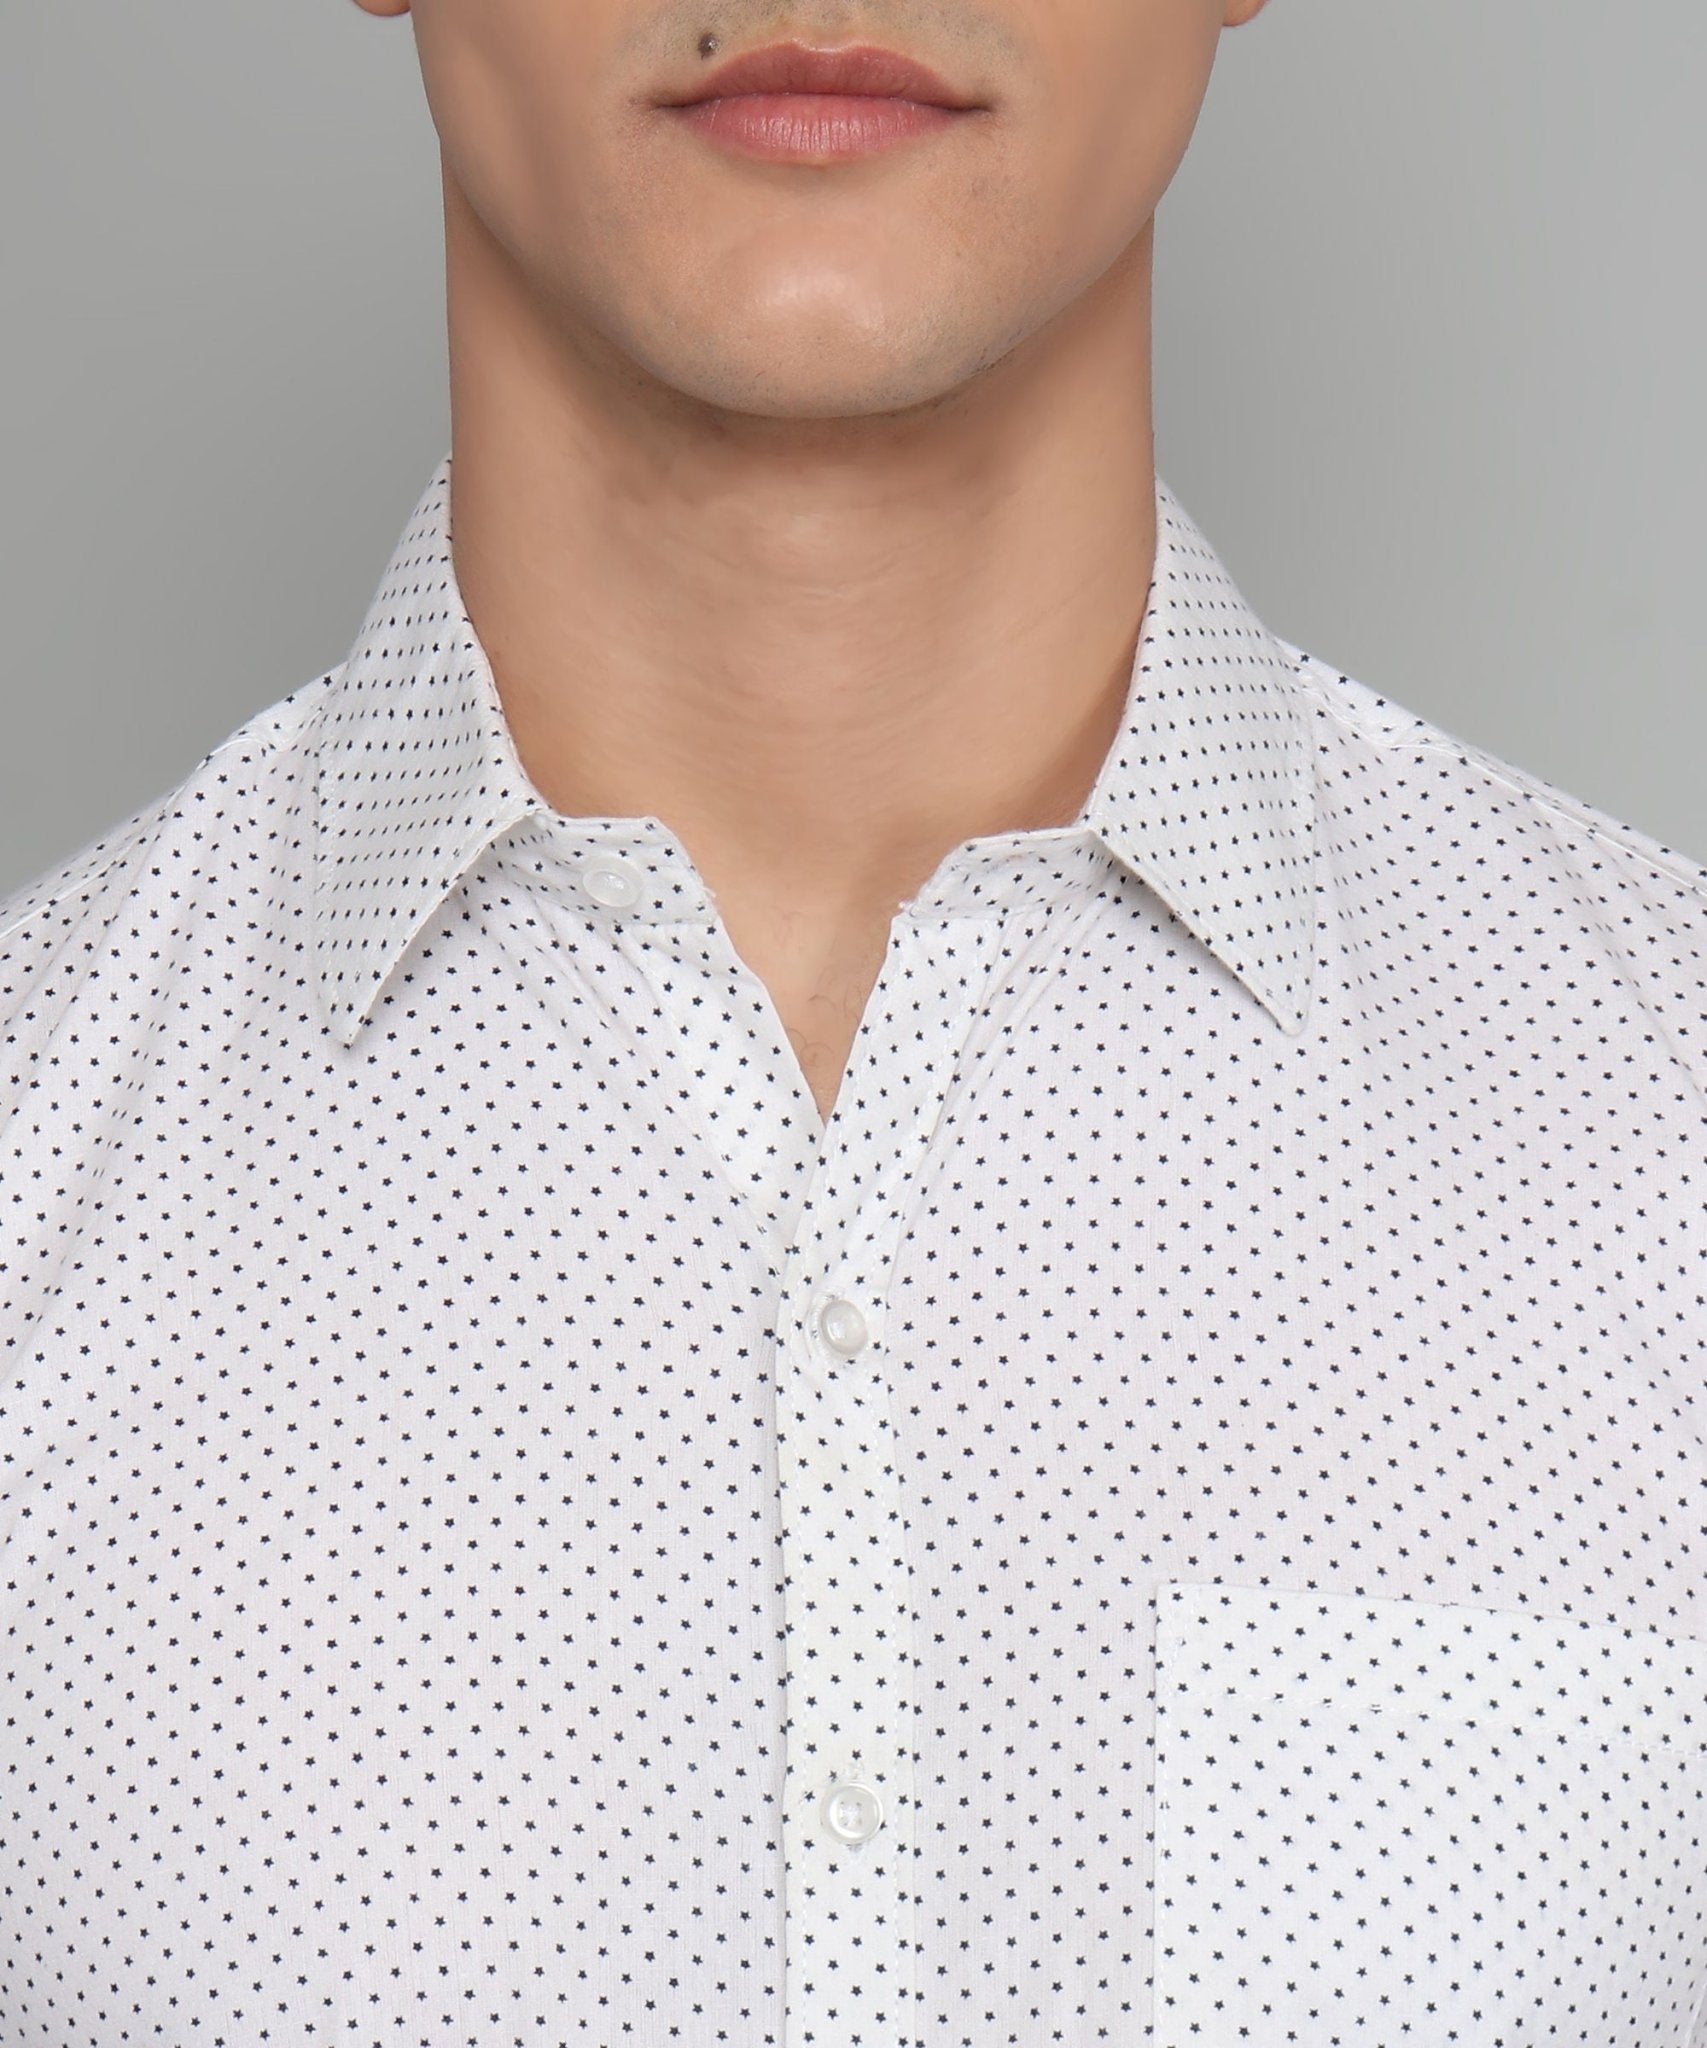 TryBuy Premium Pure Cotton Star Dot Printed Cotton Casual/Formal White Shirt for Men - TryBuy® USA🇺🇸